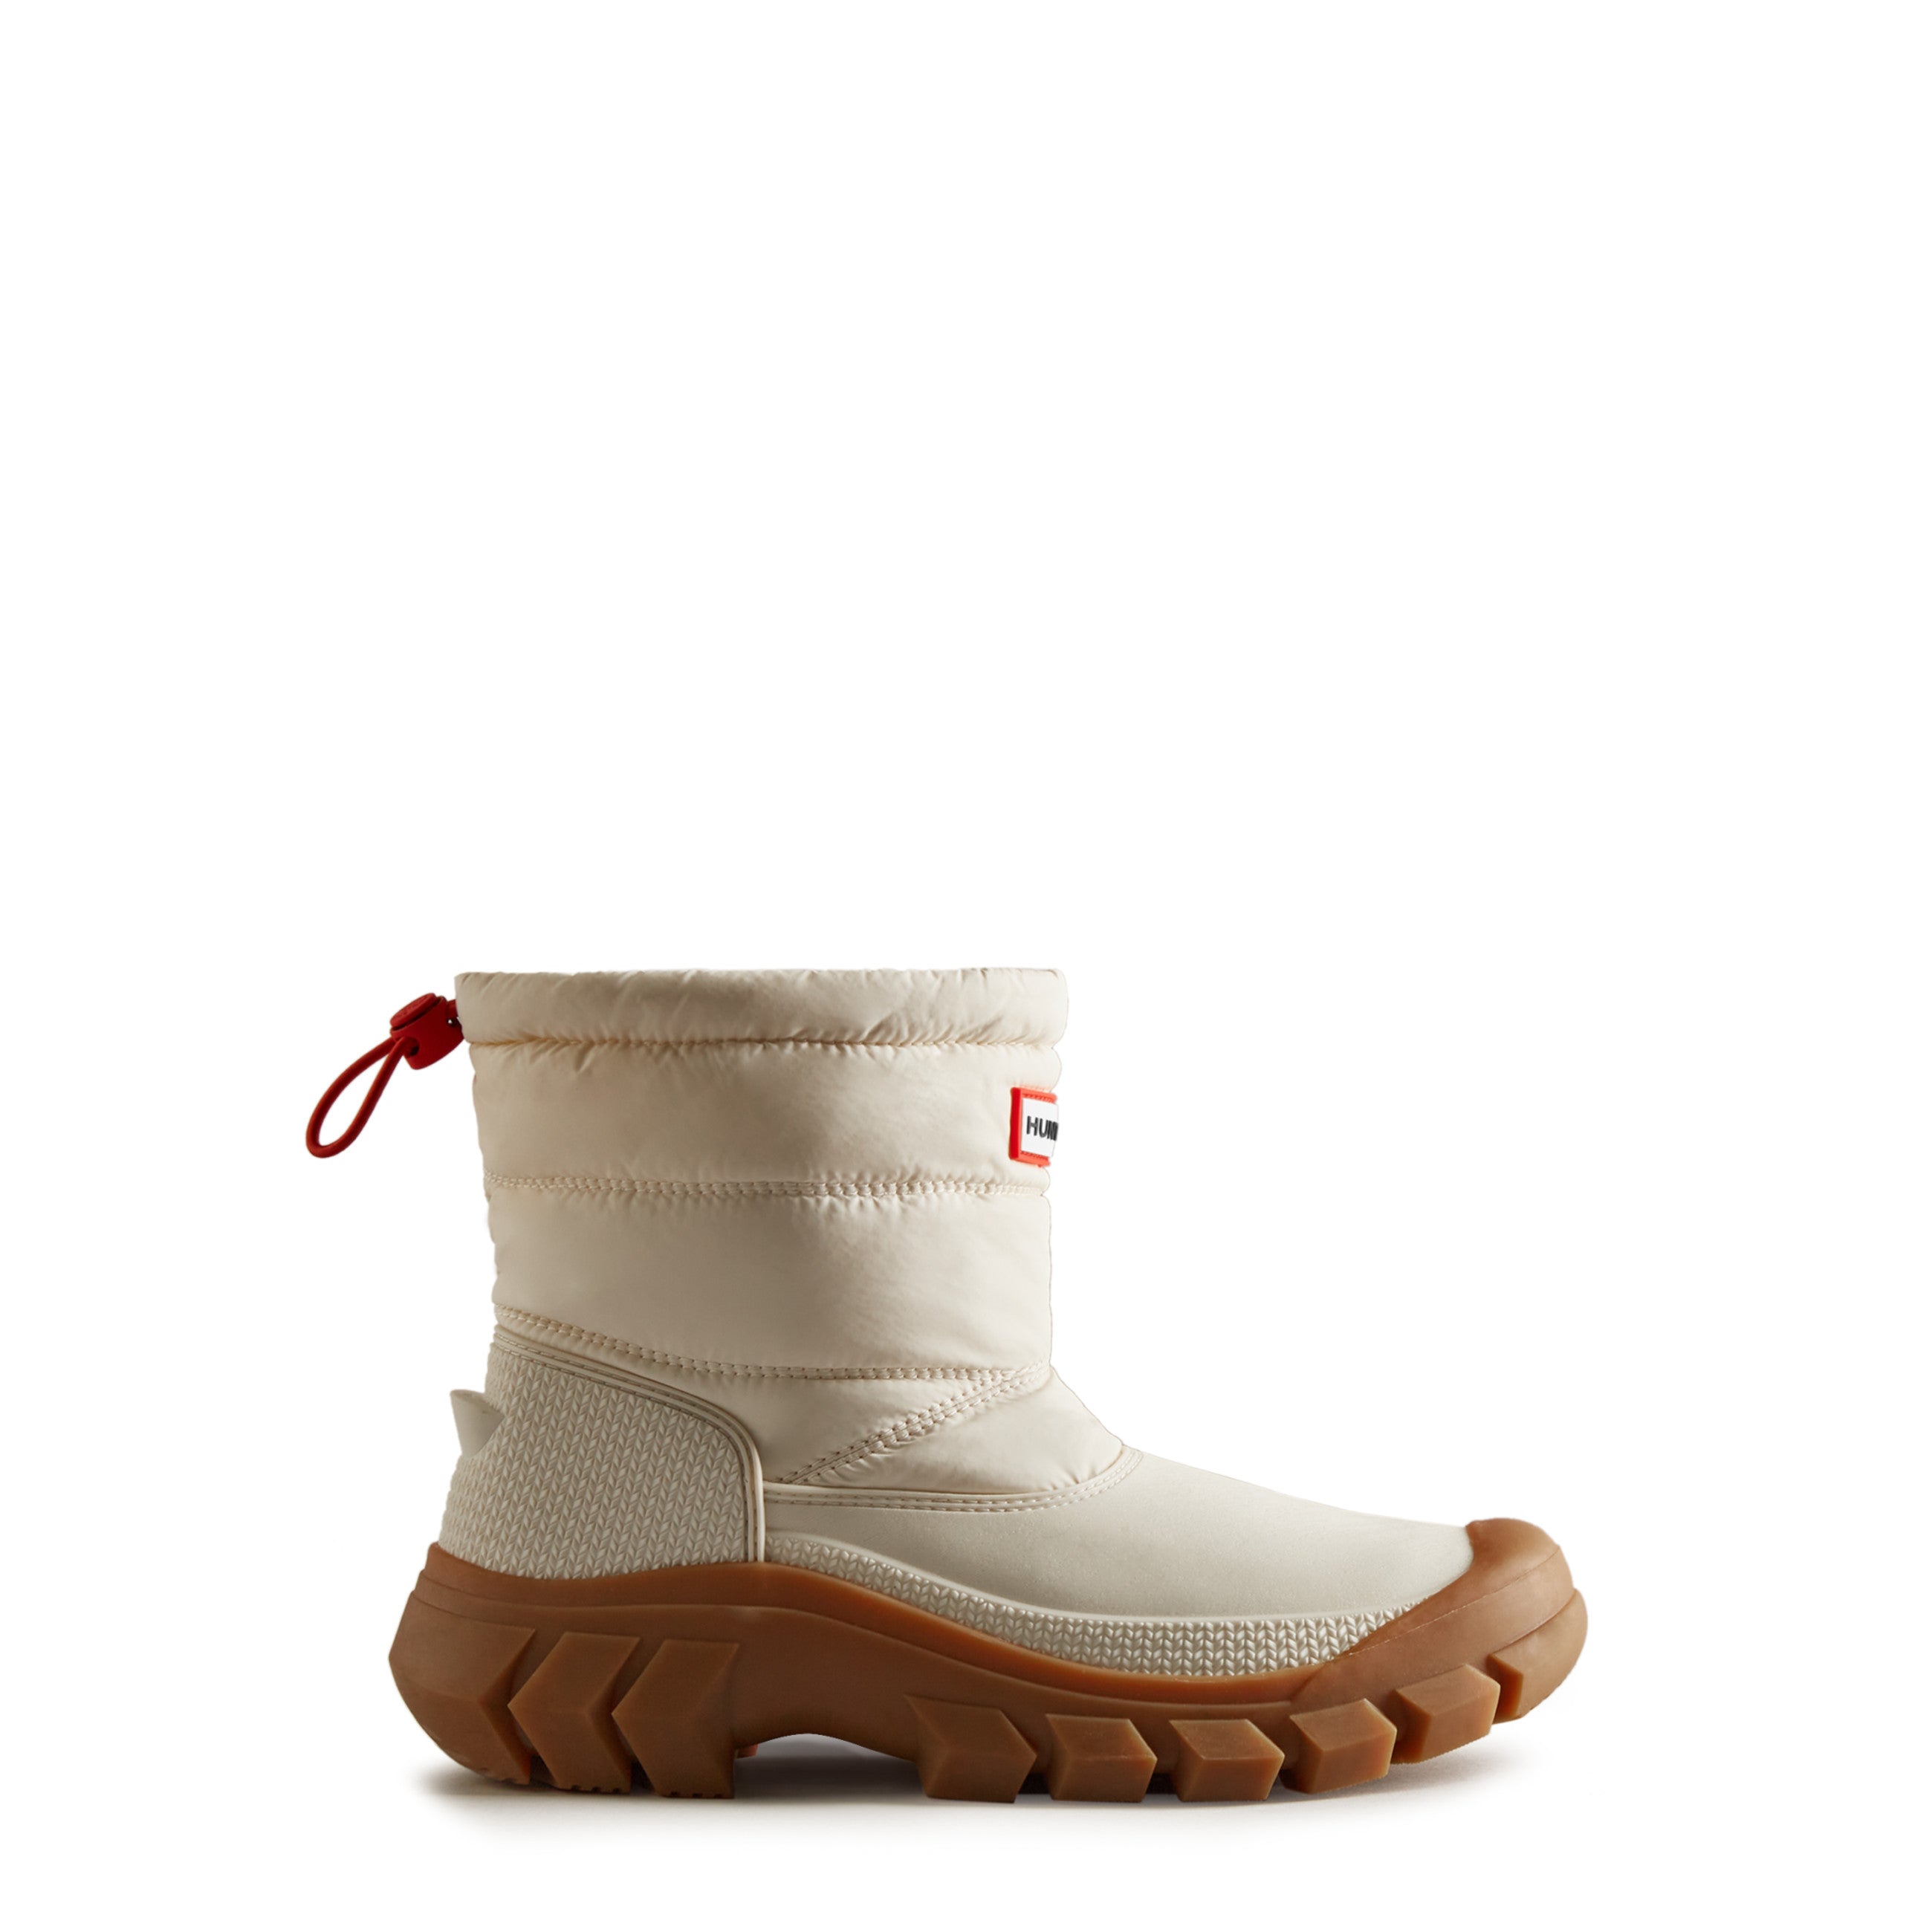 Women's Intrepid Insulated Short Snow Boots - Hunter Boots Women's Intrepid Insulated Short Snow Boots White Willow/Gum Hunter Boots Women's > Winter Footwear > Snow Boots